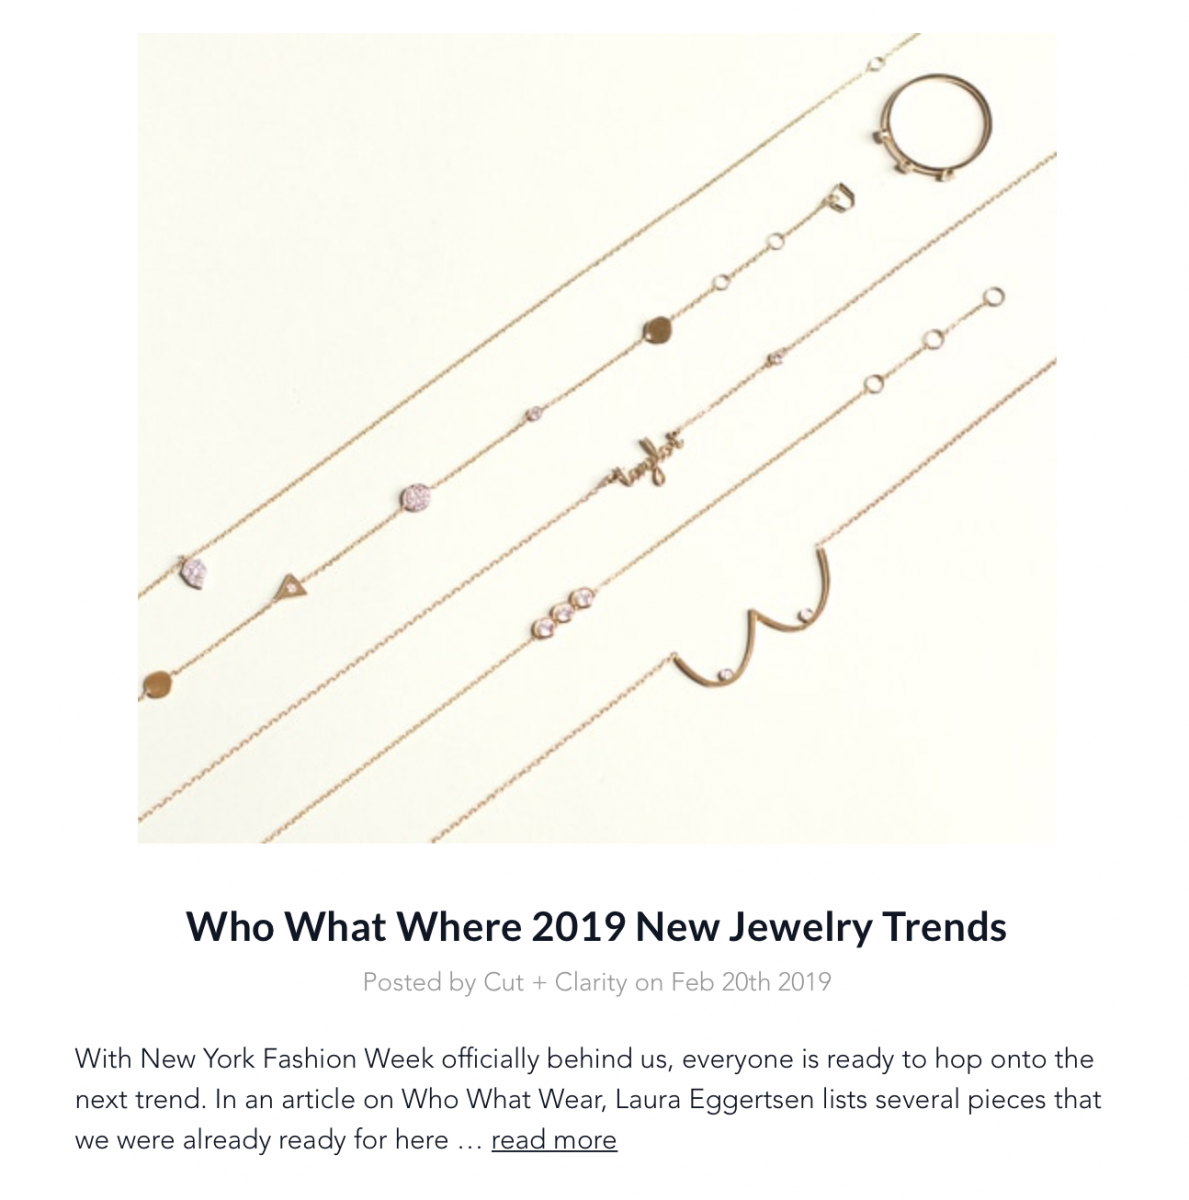 Who What Where 2019 New Jewelry Trends by Ruth Jordan